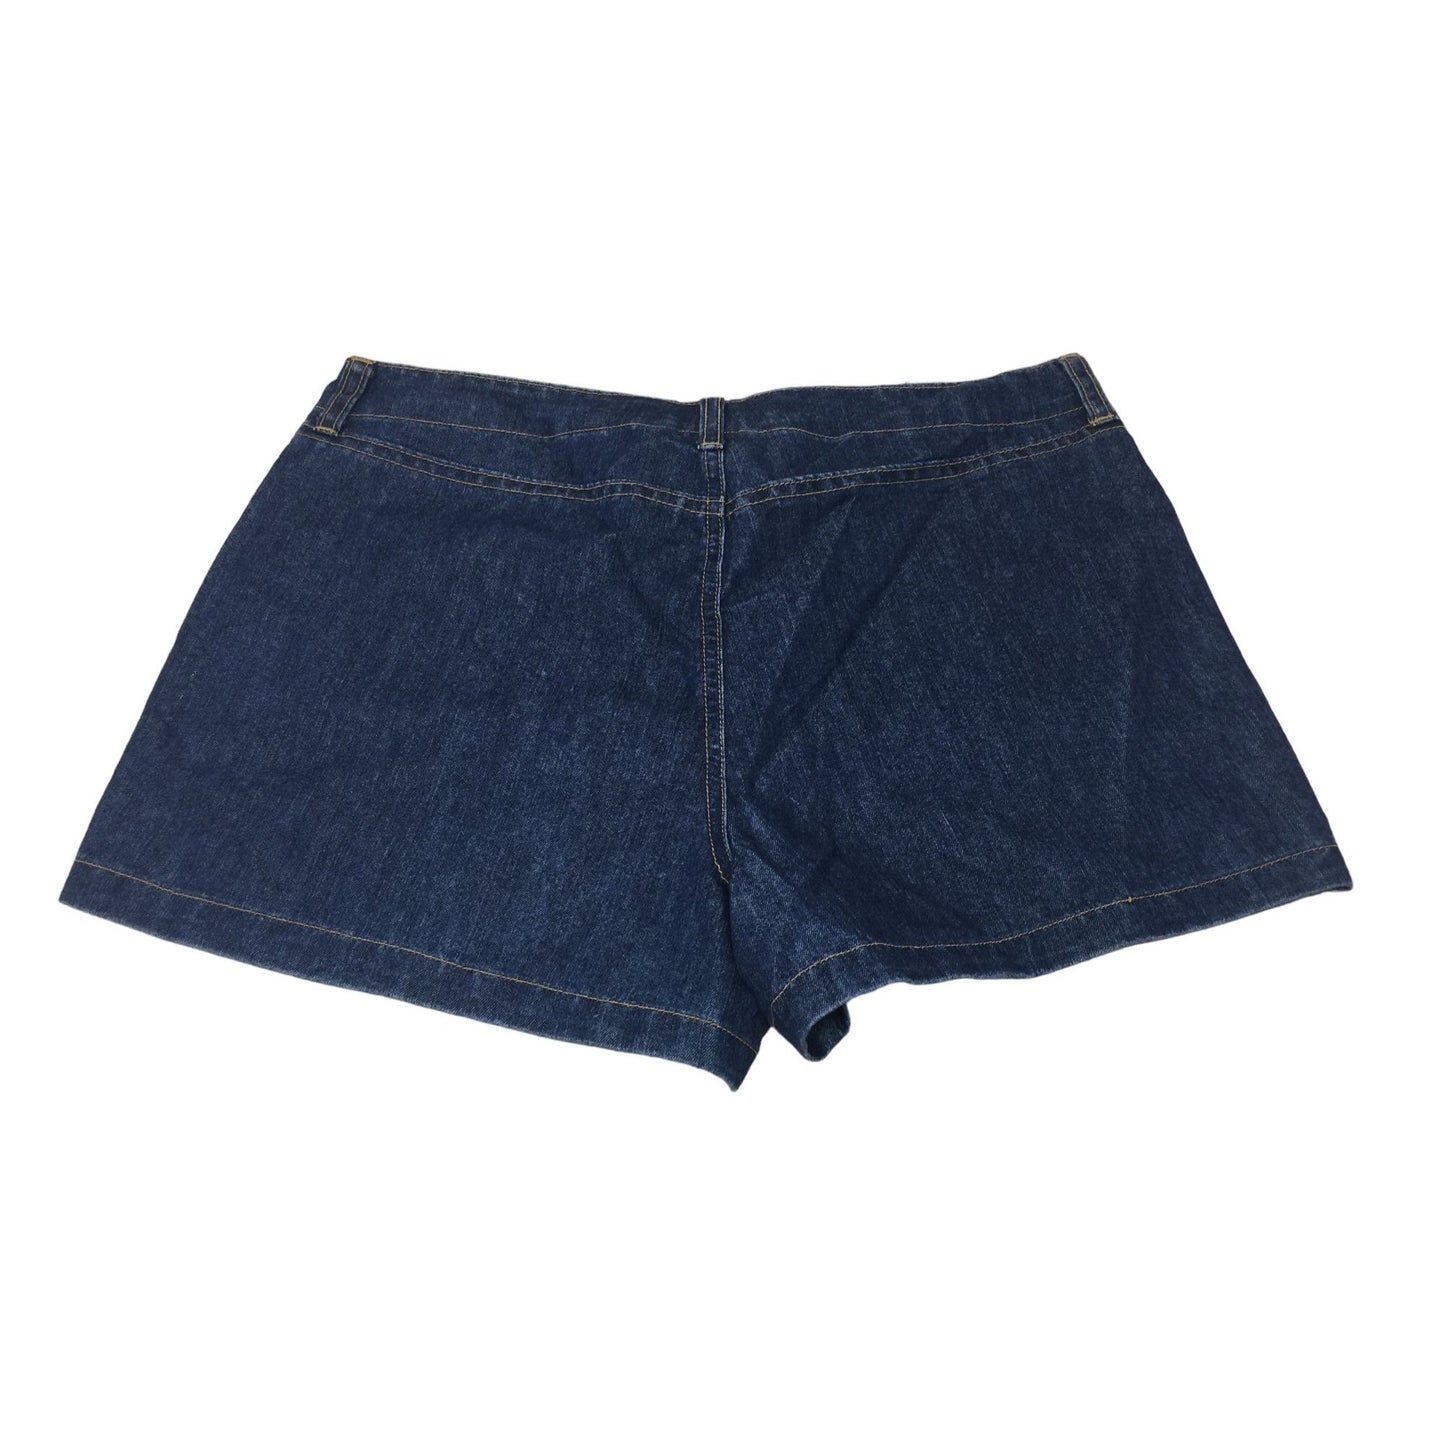 Abercrombie Denim Shorts Size 16 New with Tags